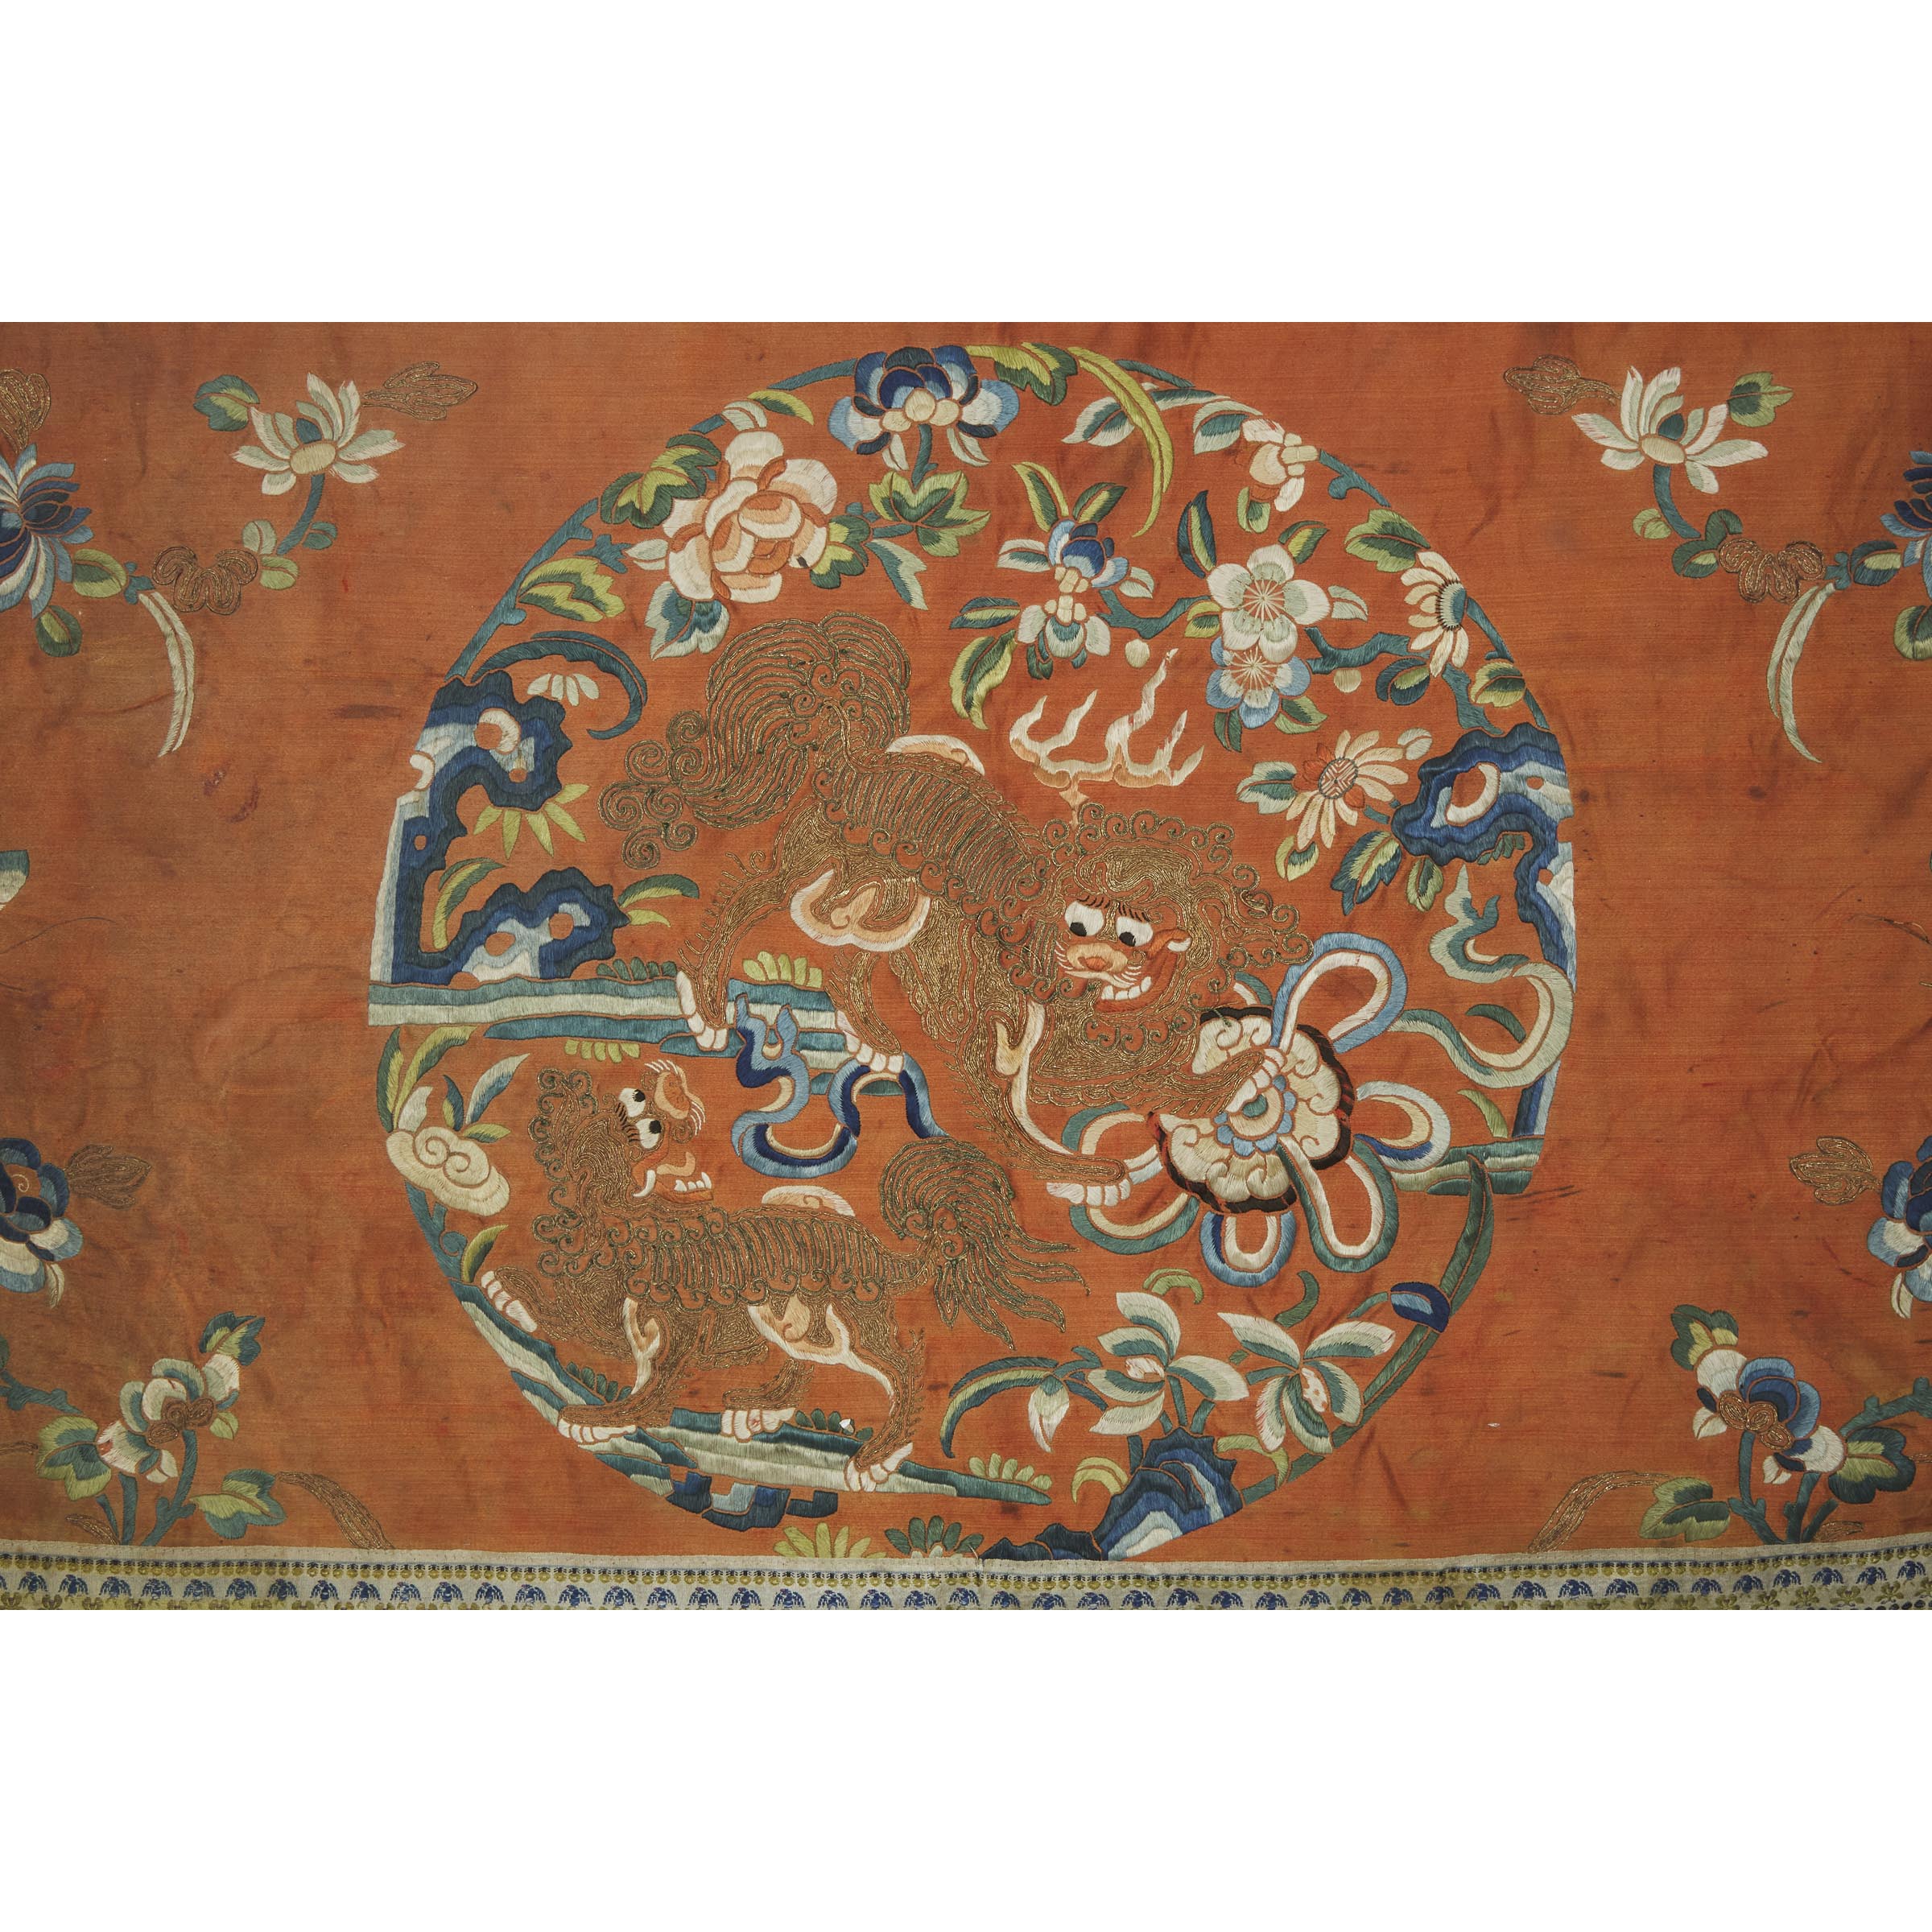 A Gold-Thread Embroidered Silk 'Buddhist Lions' Panel, 19th Century